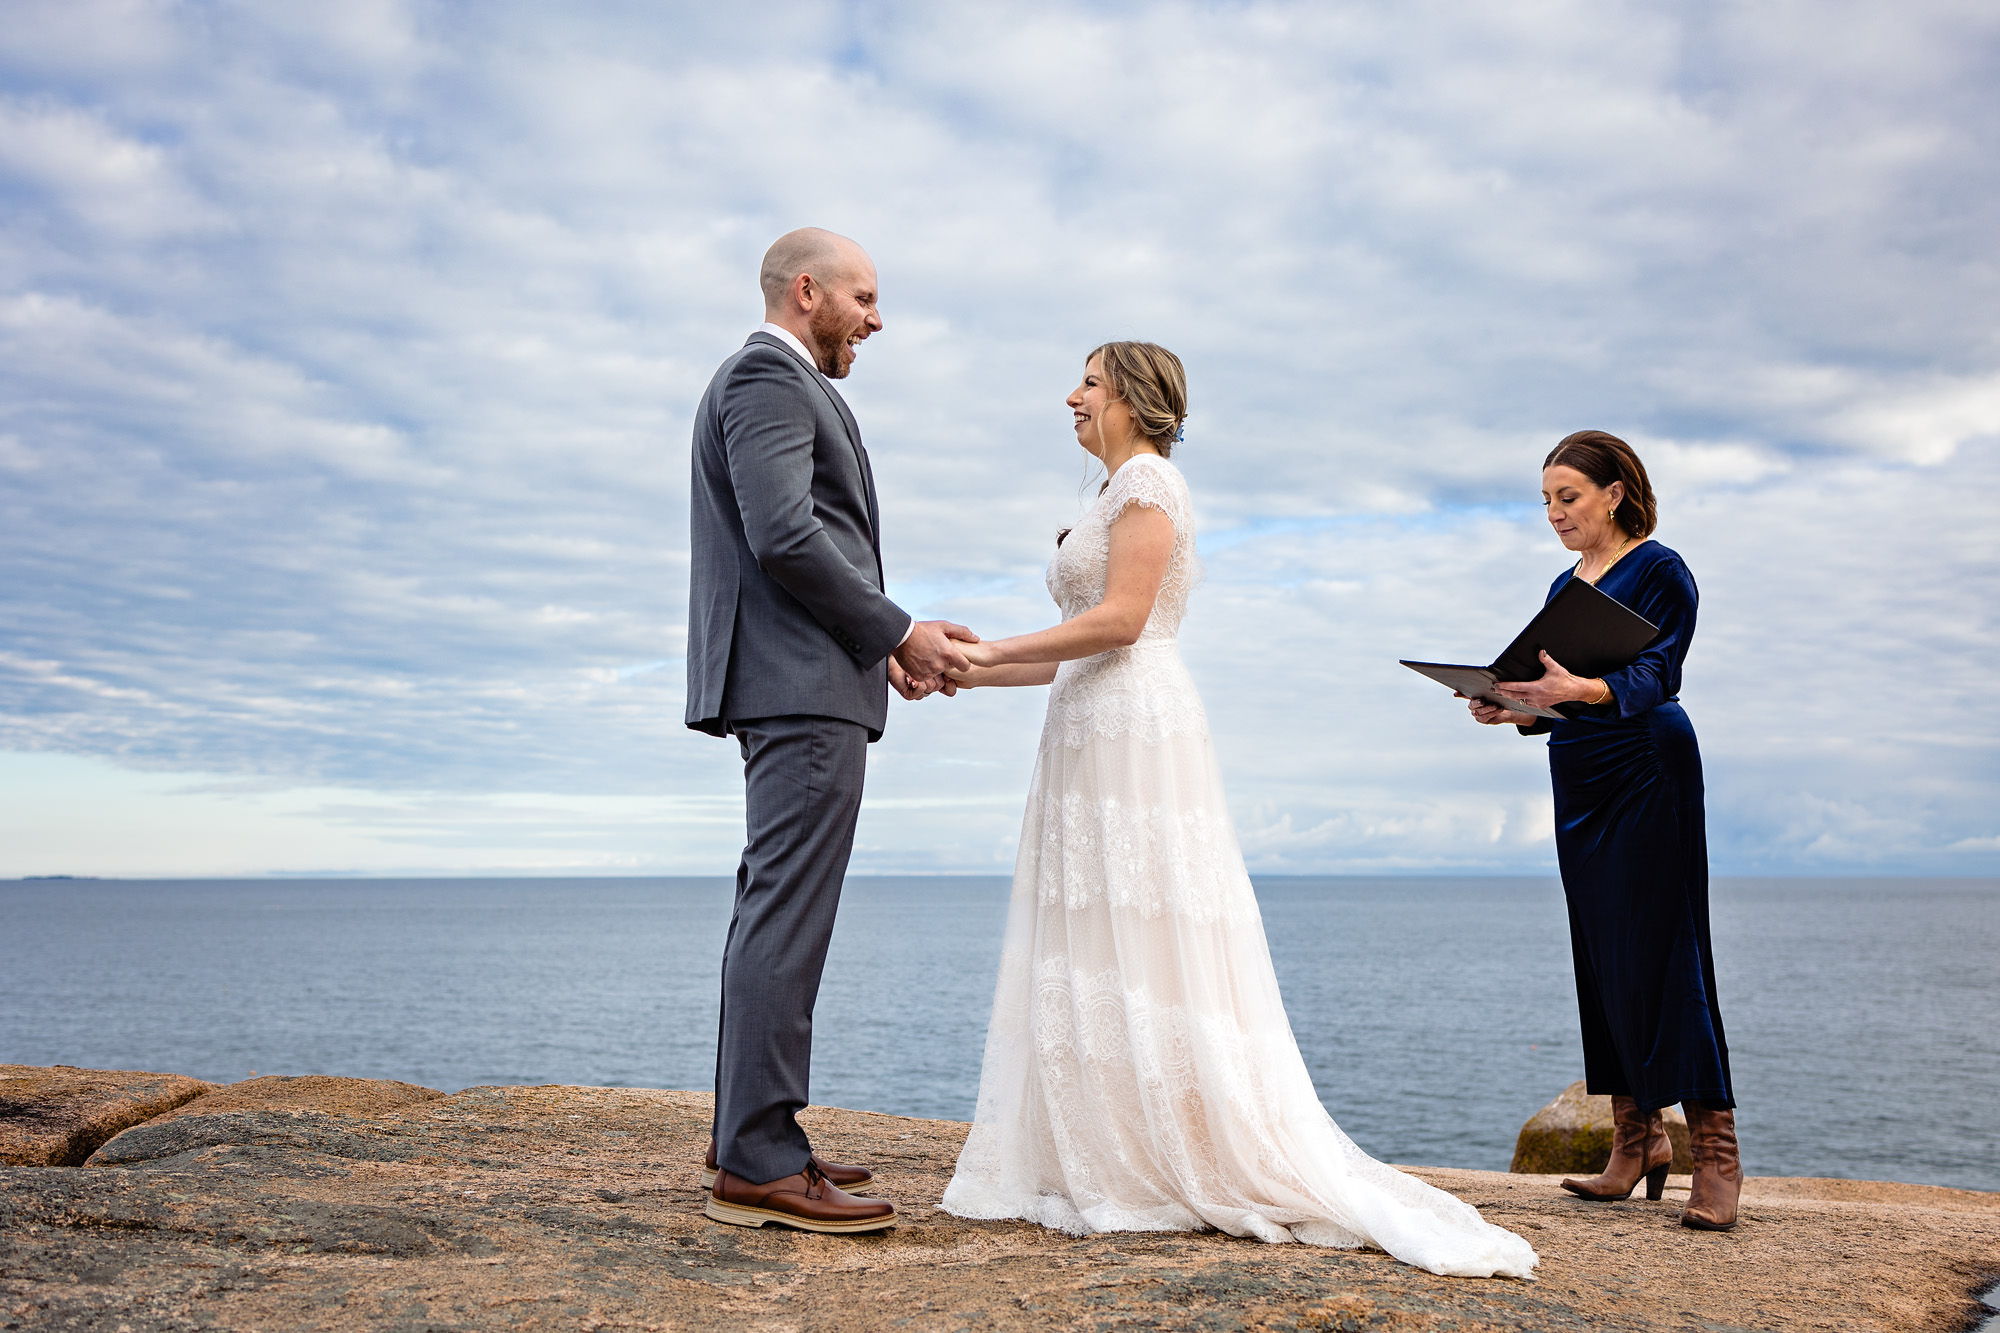 A cliffside elopement with a view of the ocean in Acadia National Park